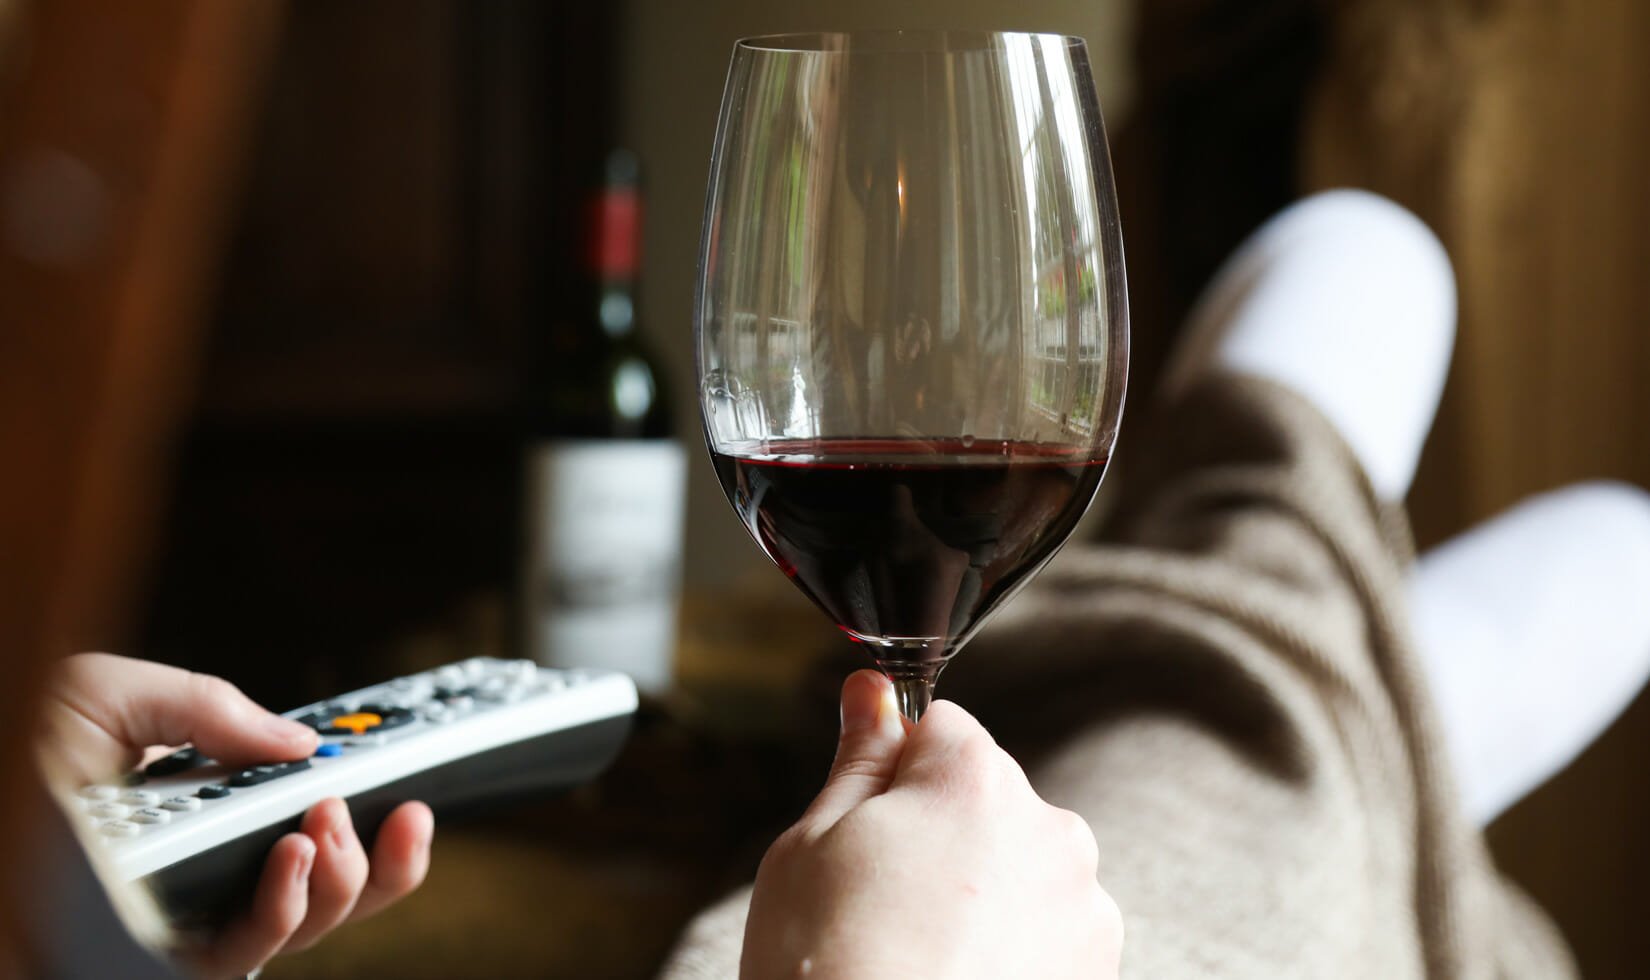 hands holding a glass of Jordan Winery Cabernet and a TV remote, with legs covered by a blanket in the background